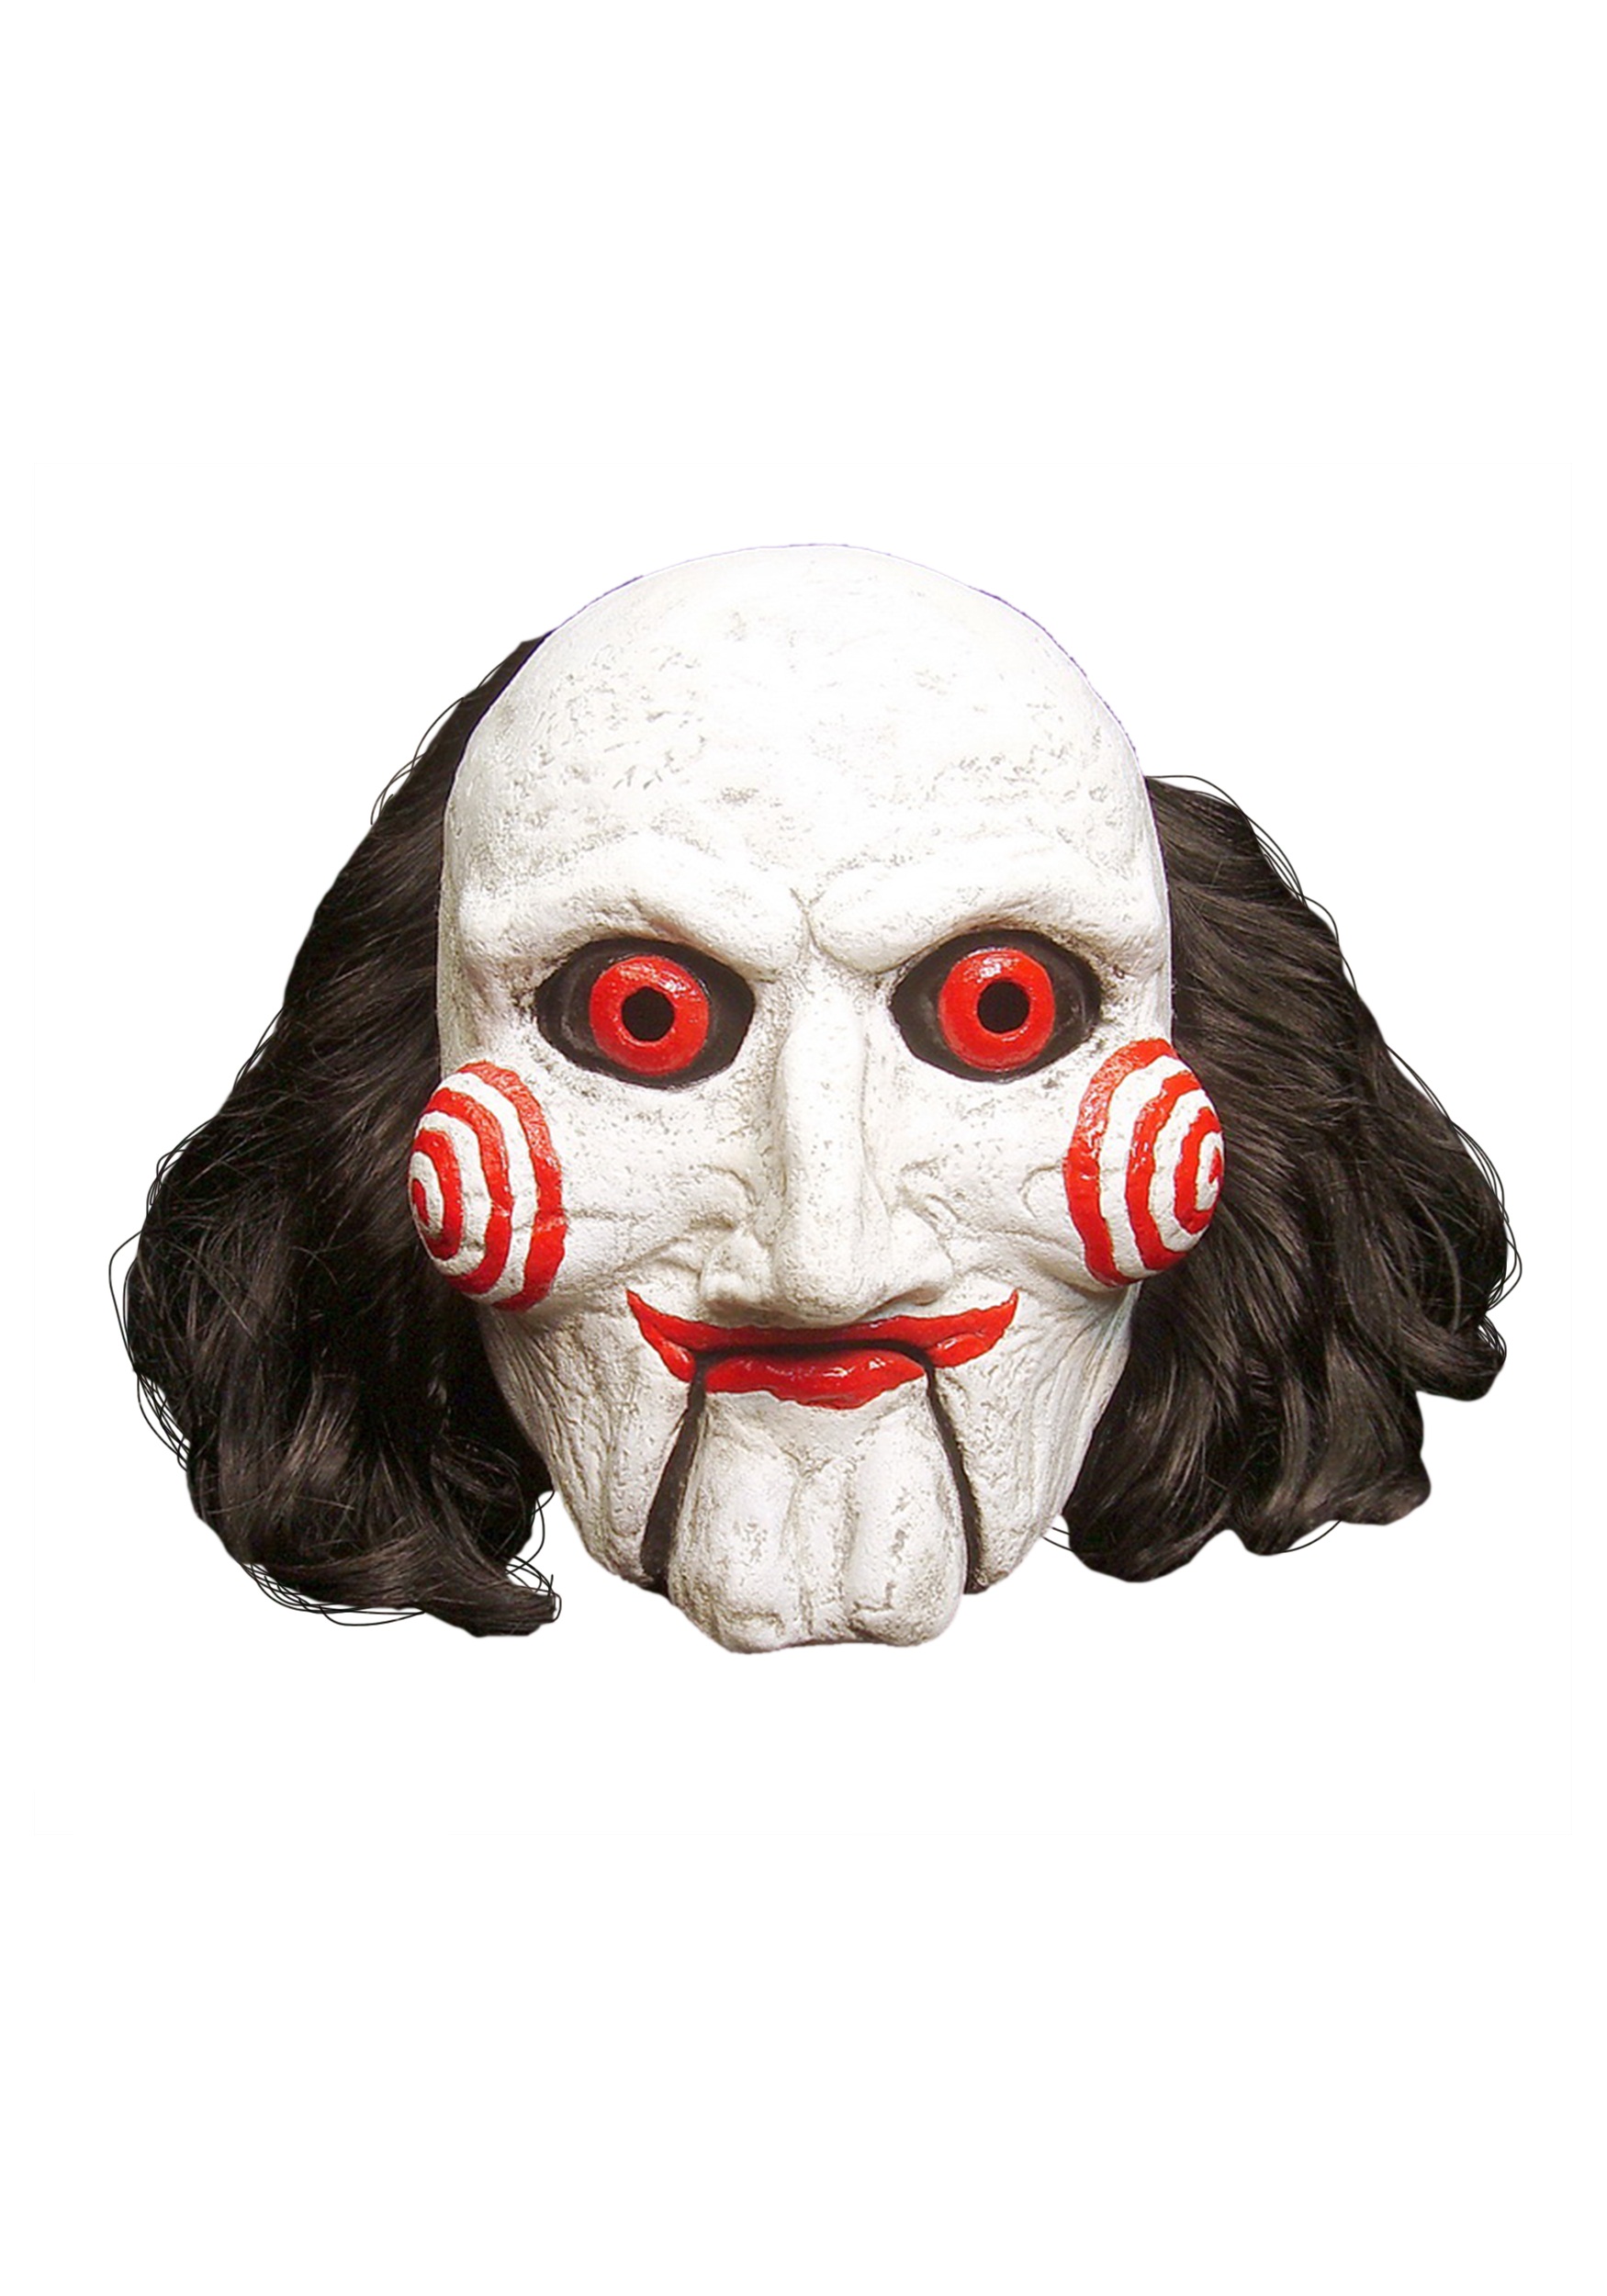 Halloween Cosplay Saw Puppet Horror Scary Face Mask White